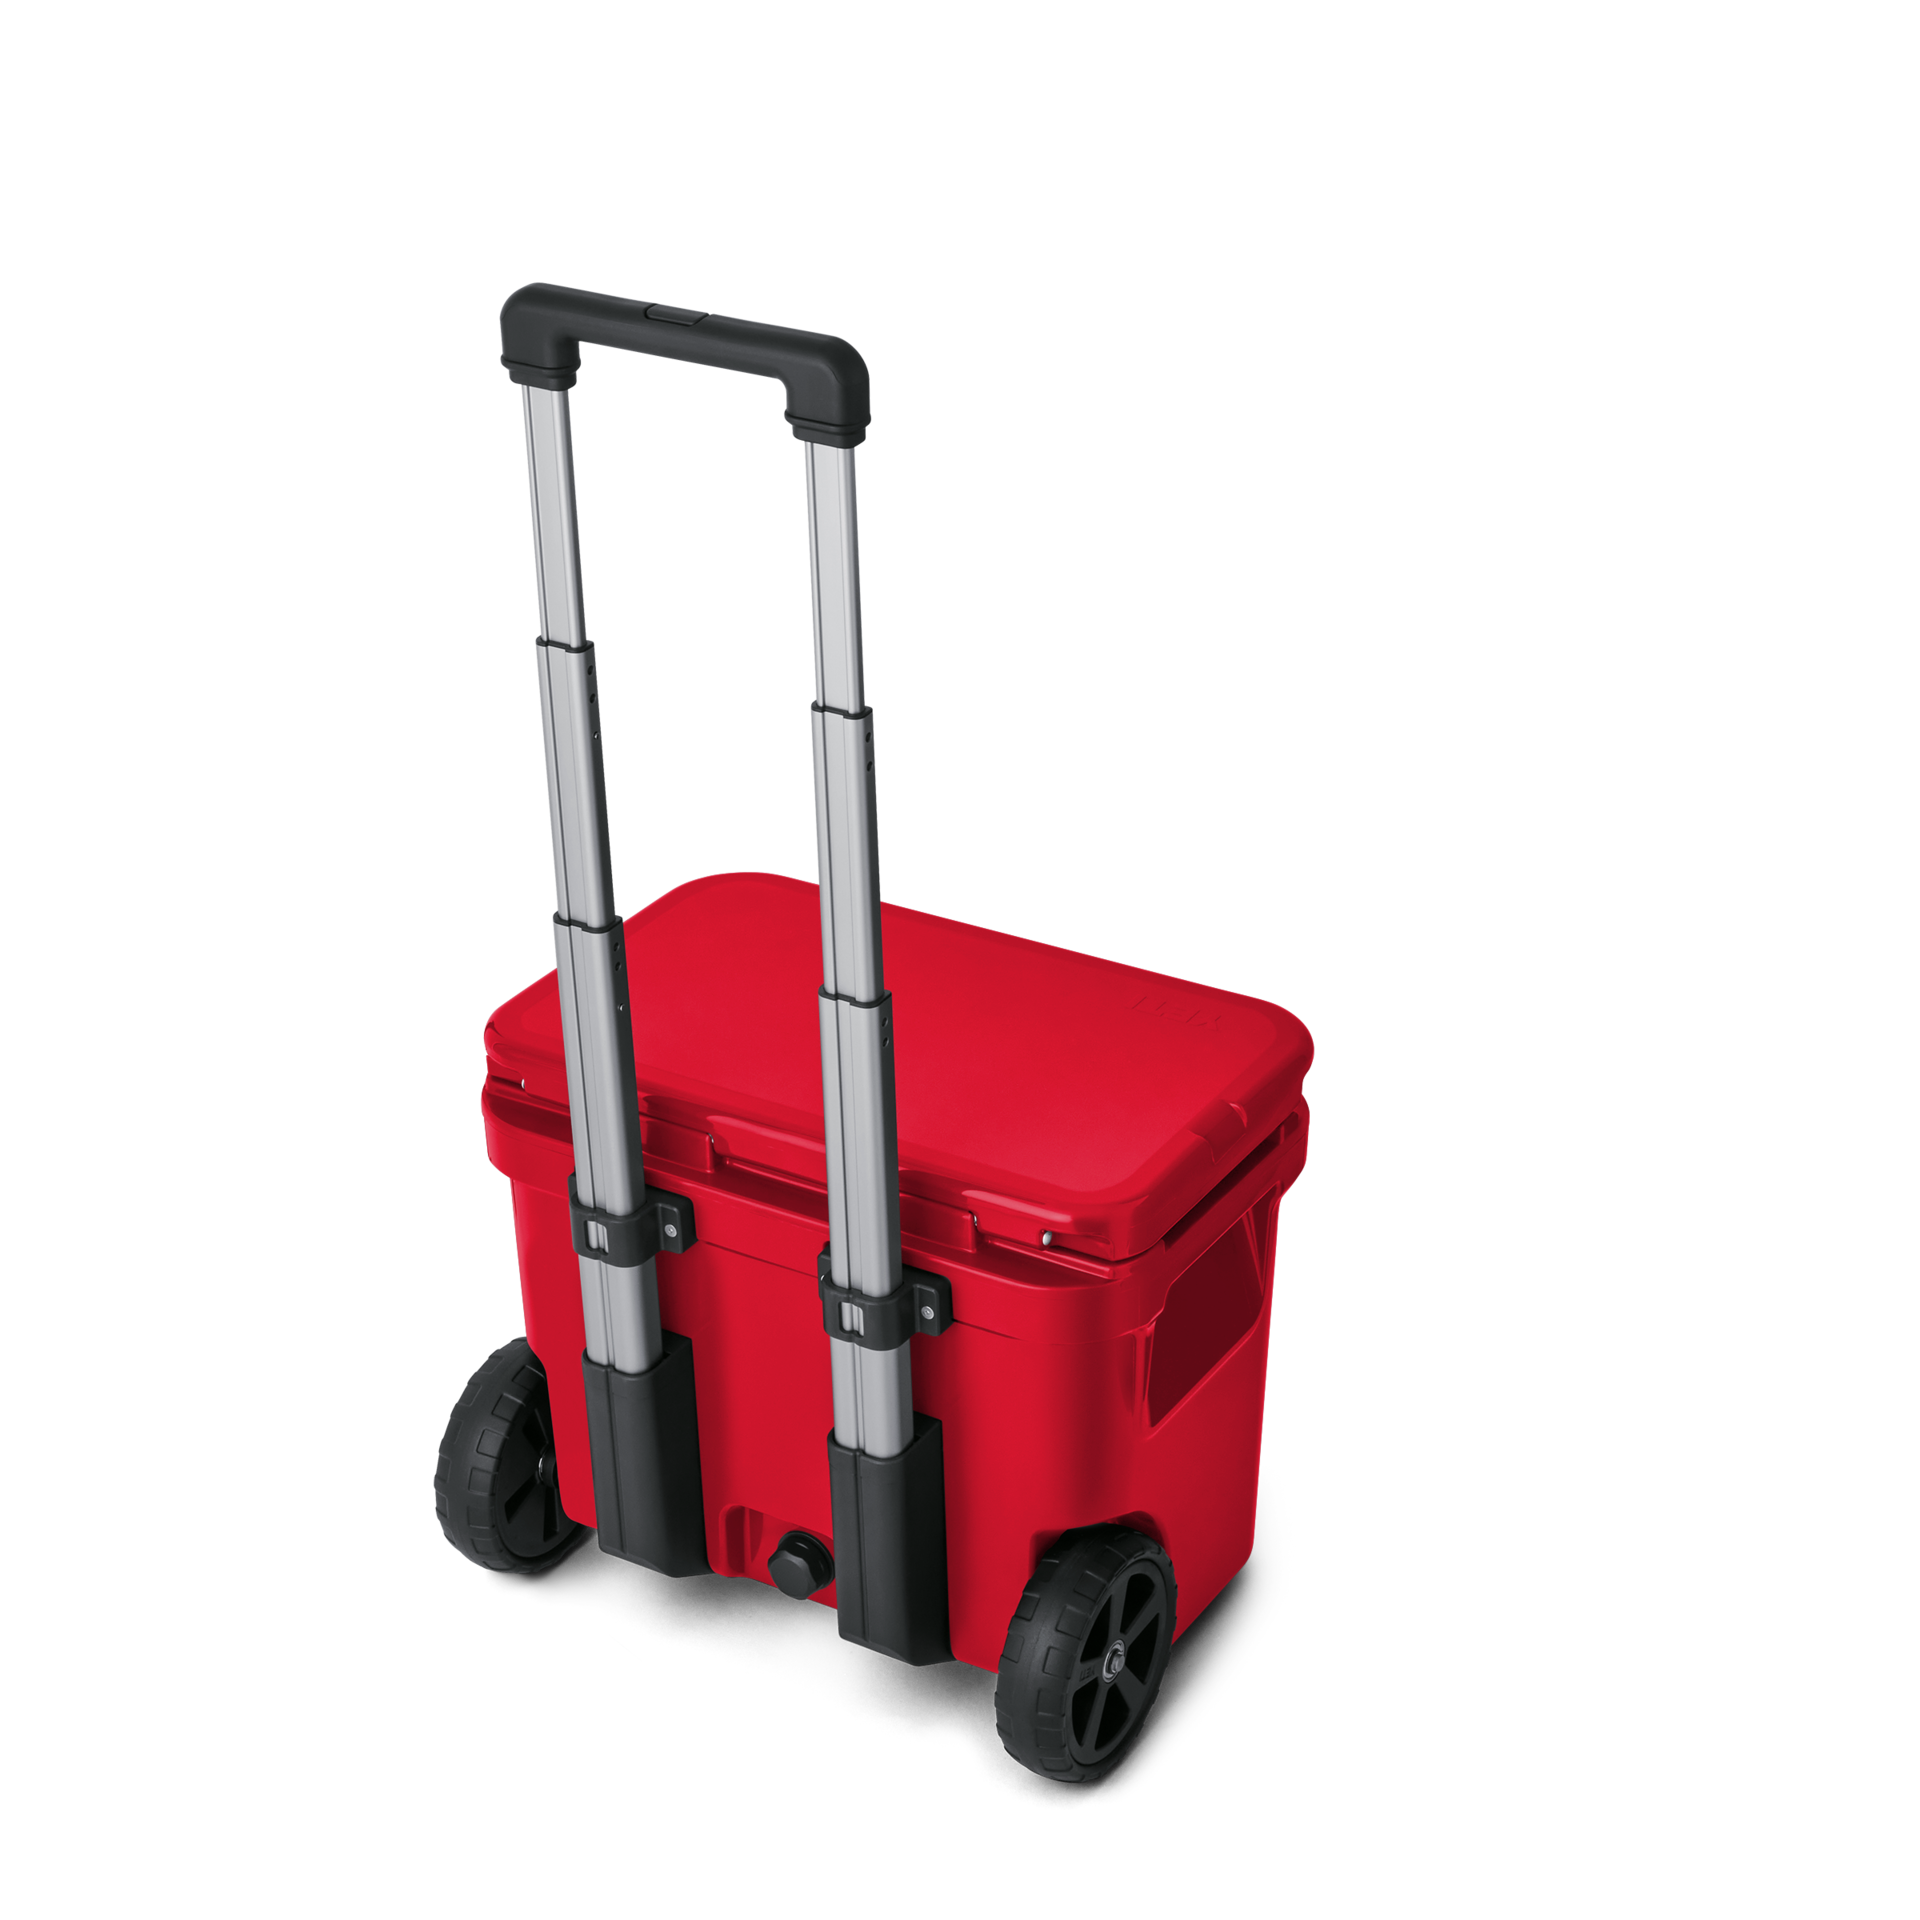 Roadie 32 Wheeled Cooler - Rescue Red